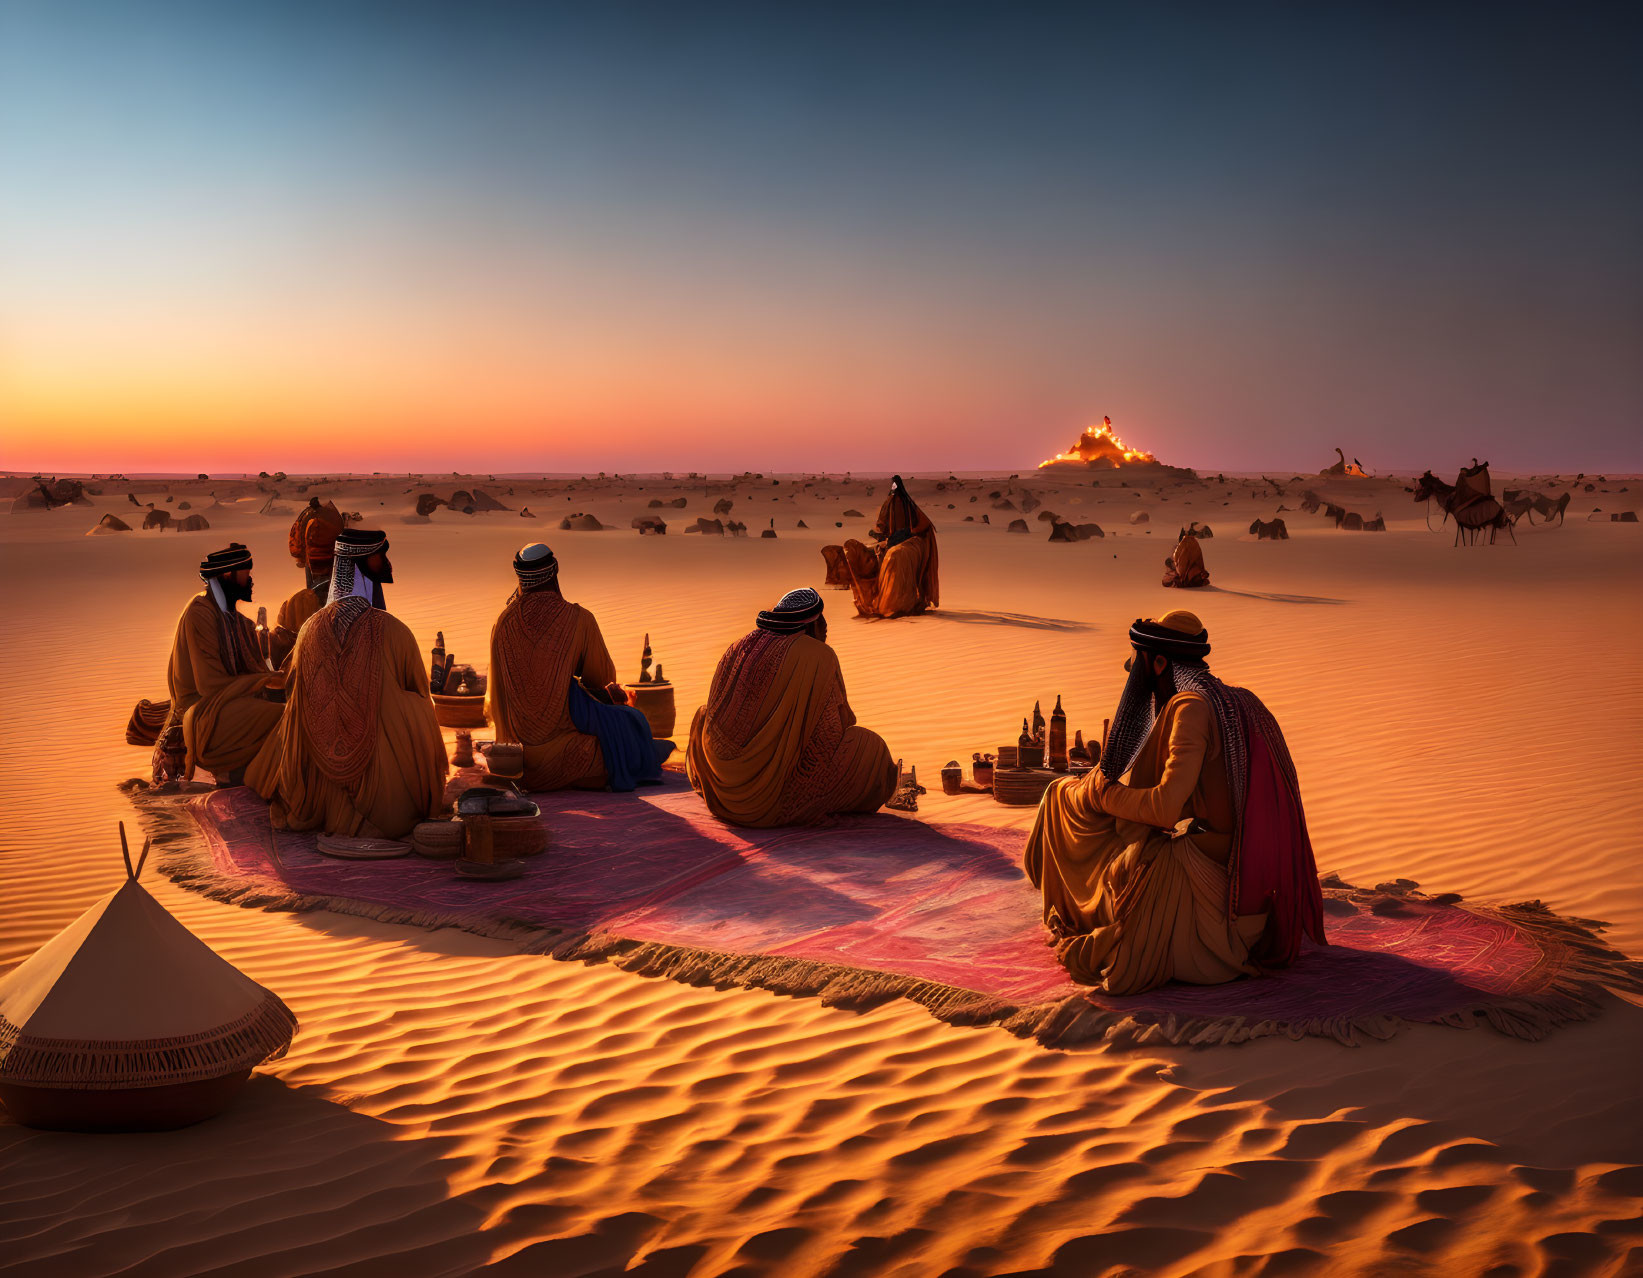 Traditional desert meal at sunset with group in dress, camels, and tent